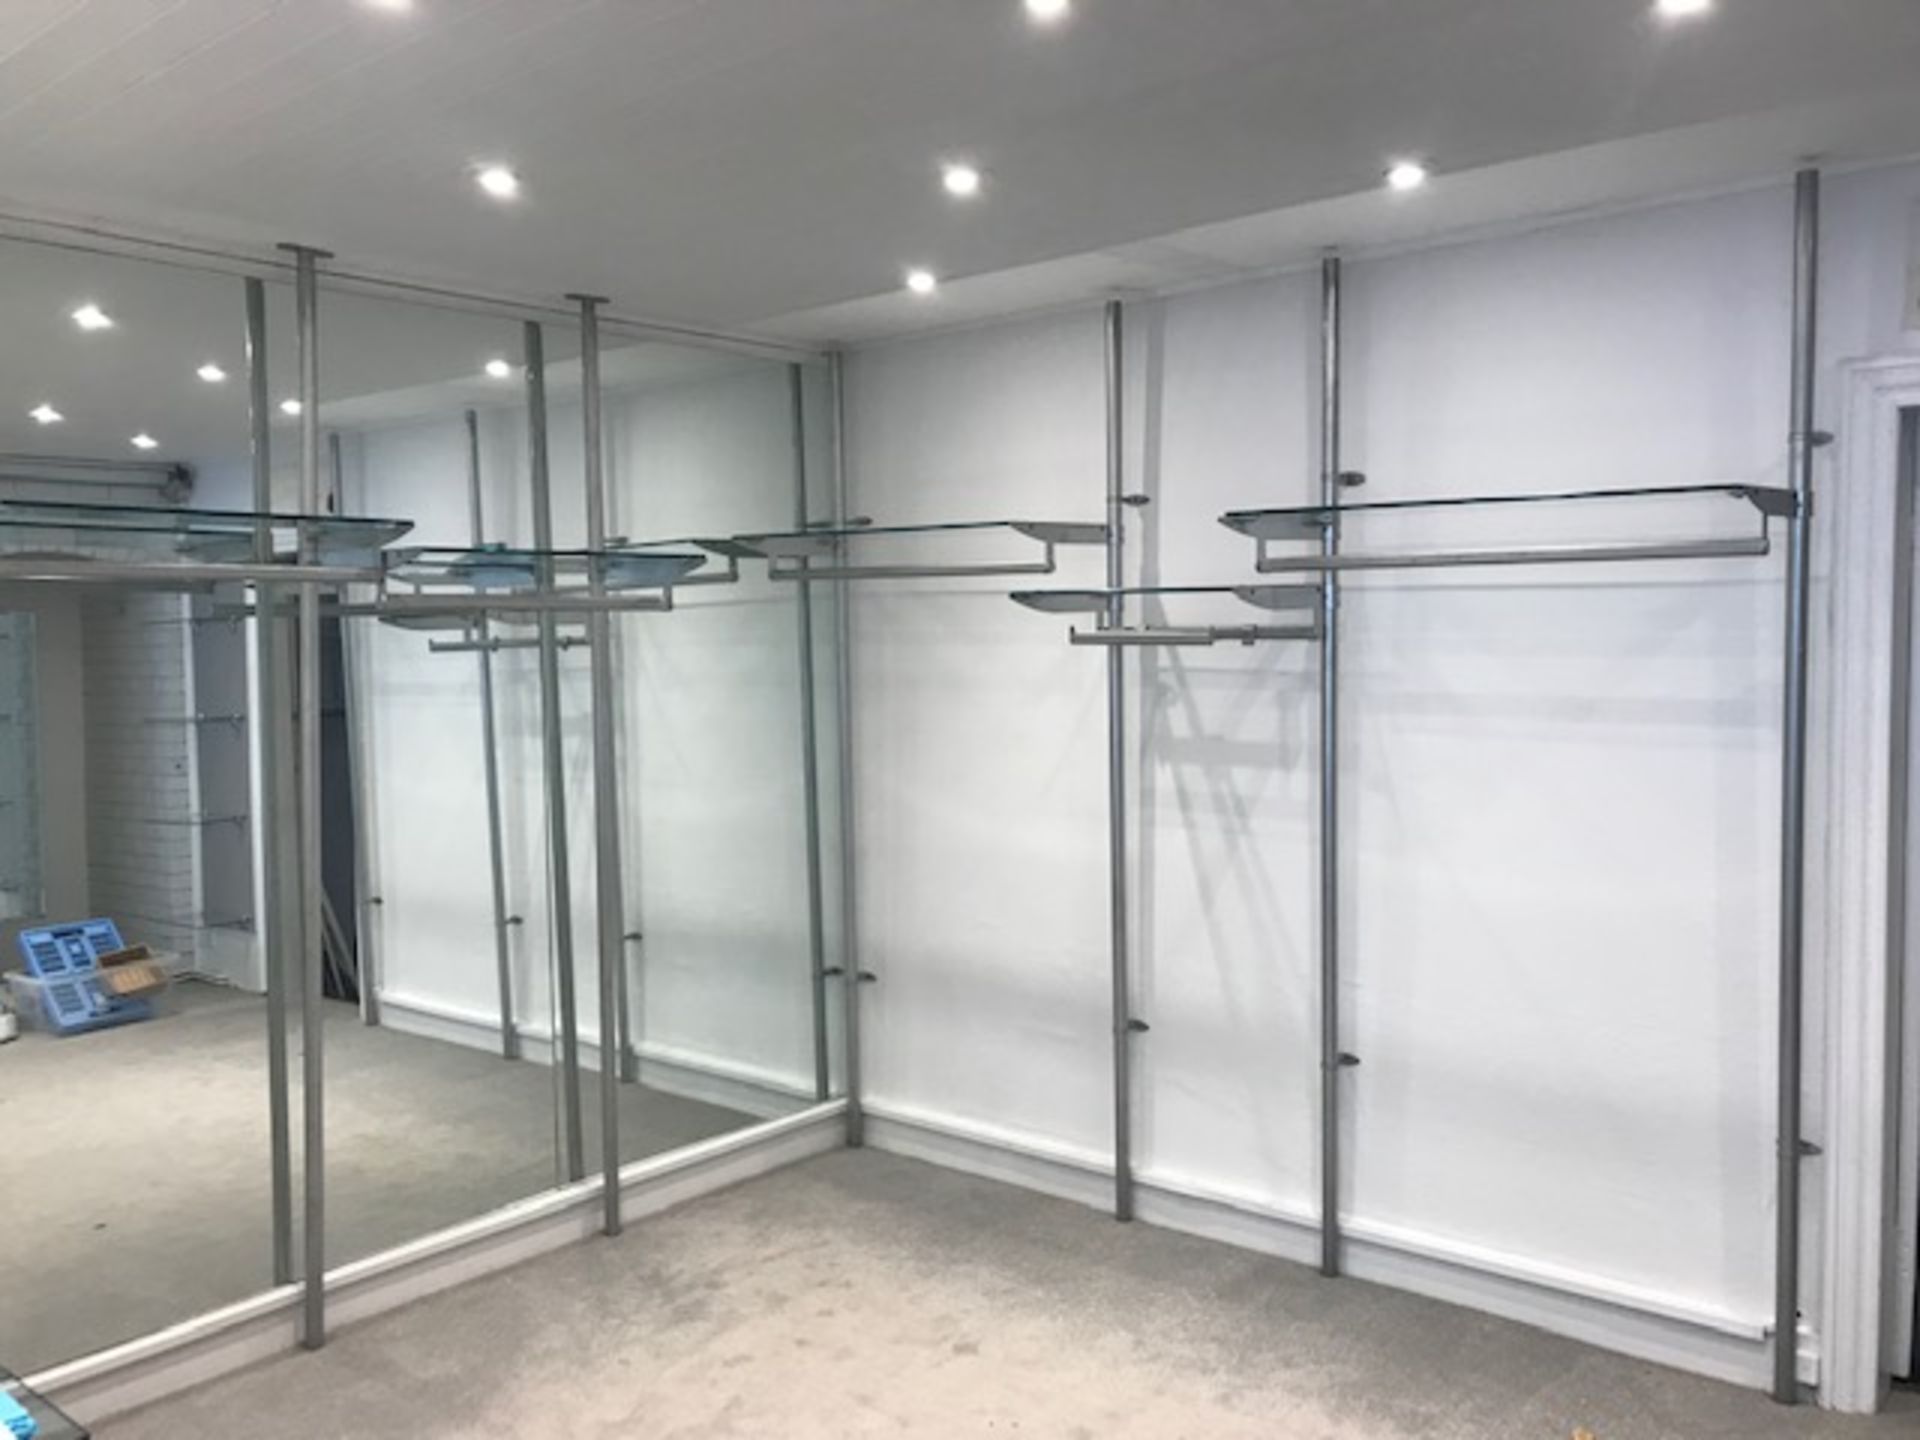 Cil ‘Javelin’ Stainless Steel Modular Shop Fittings Comprising 10 Uprights, Gondola Stand,